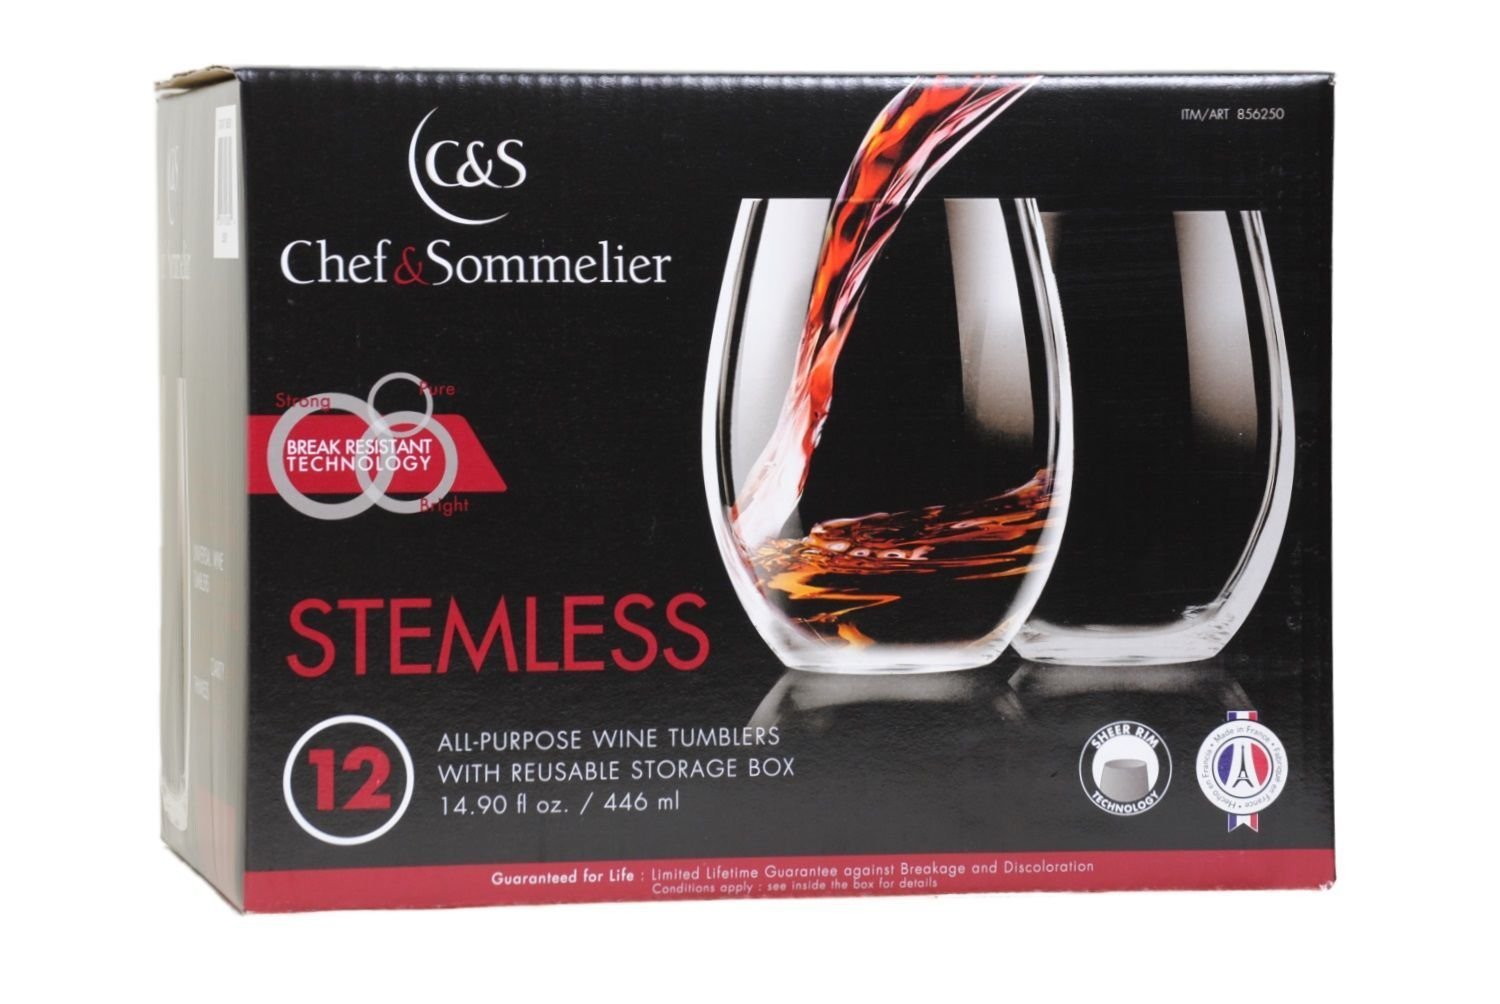 https://www.sigoja.com/products/Chef%20&%20Sommelier%2012%20Piece%20Stemless%20All%20Purpose%20Wine%20Tumblers.jpg